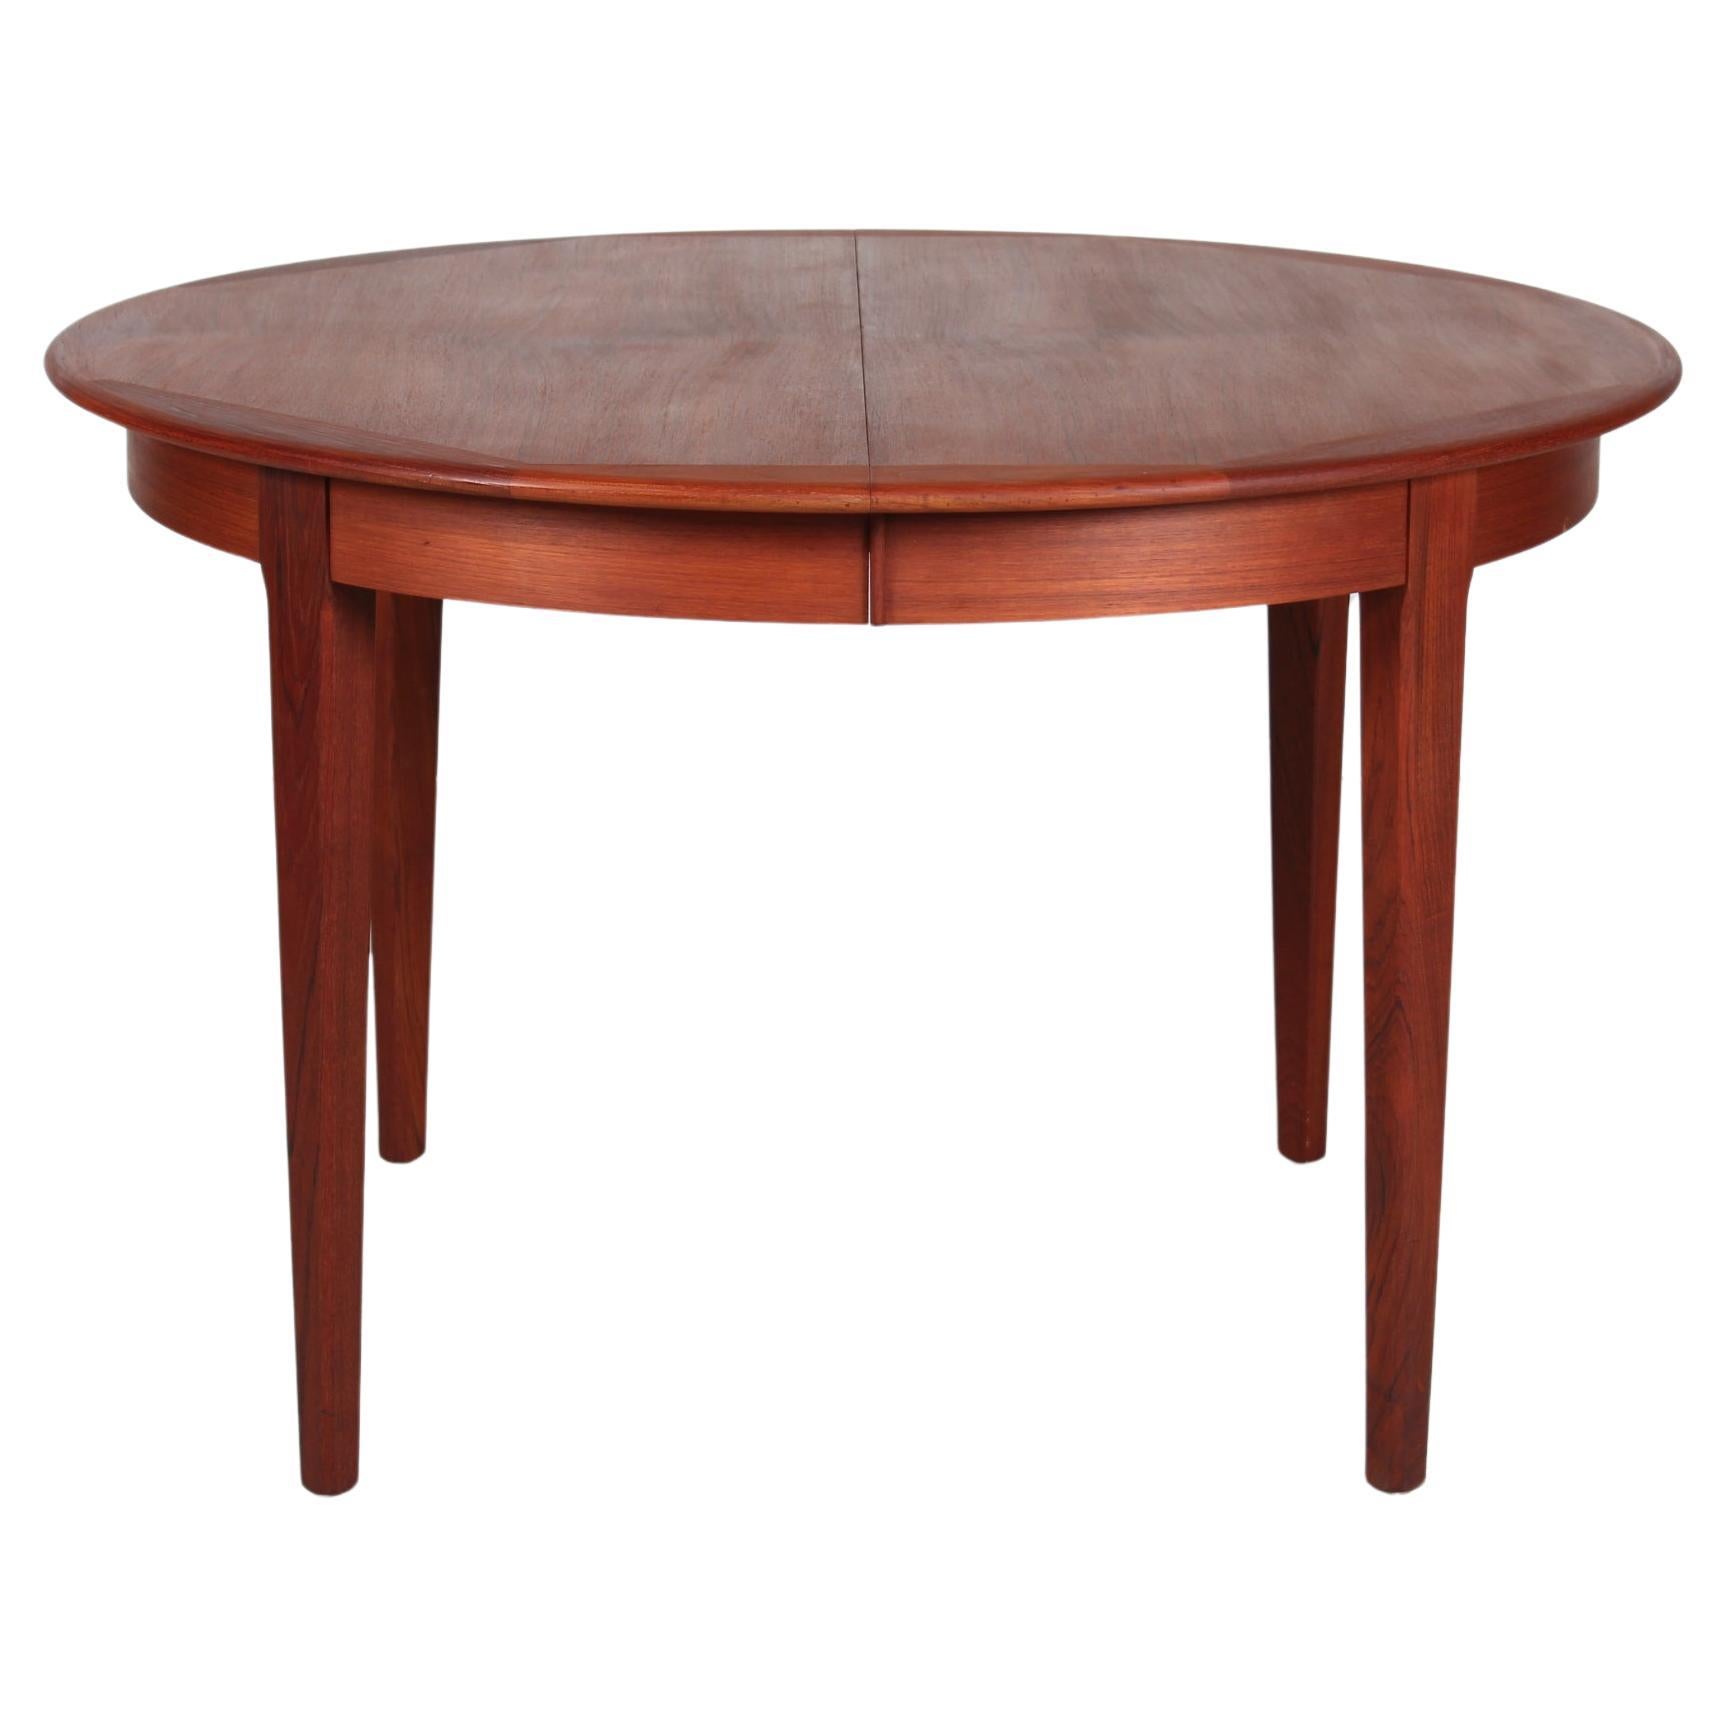 Danish Modern Round Dining Table of Teak with Leaves by Danish Cabinetmaker 70s